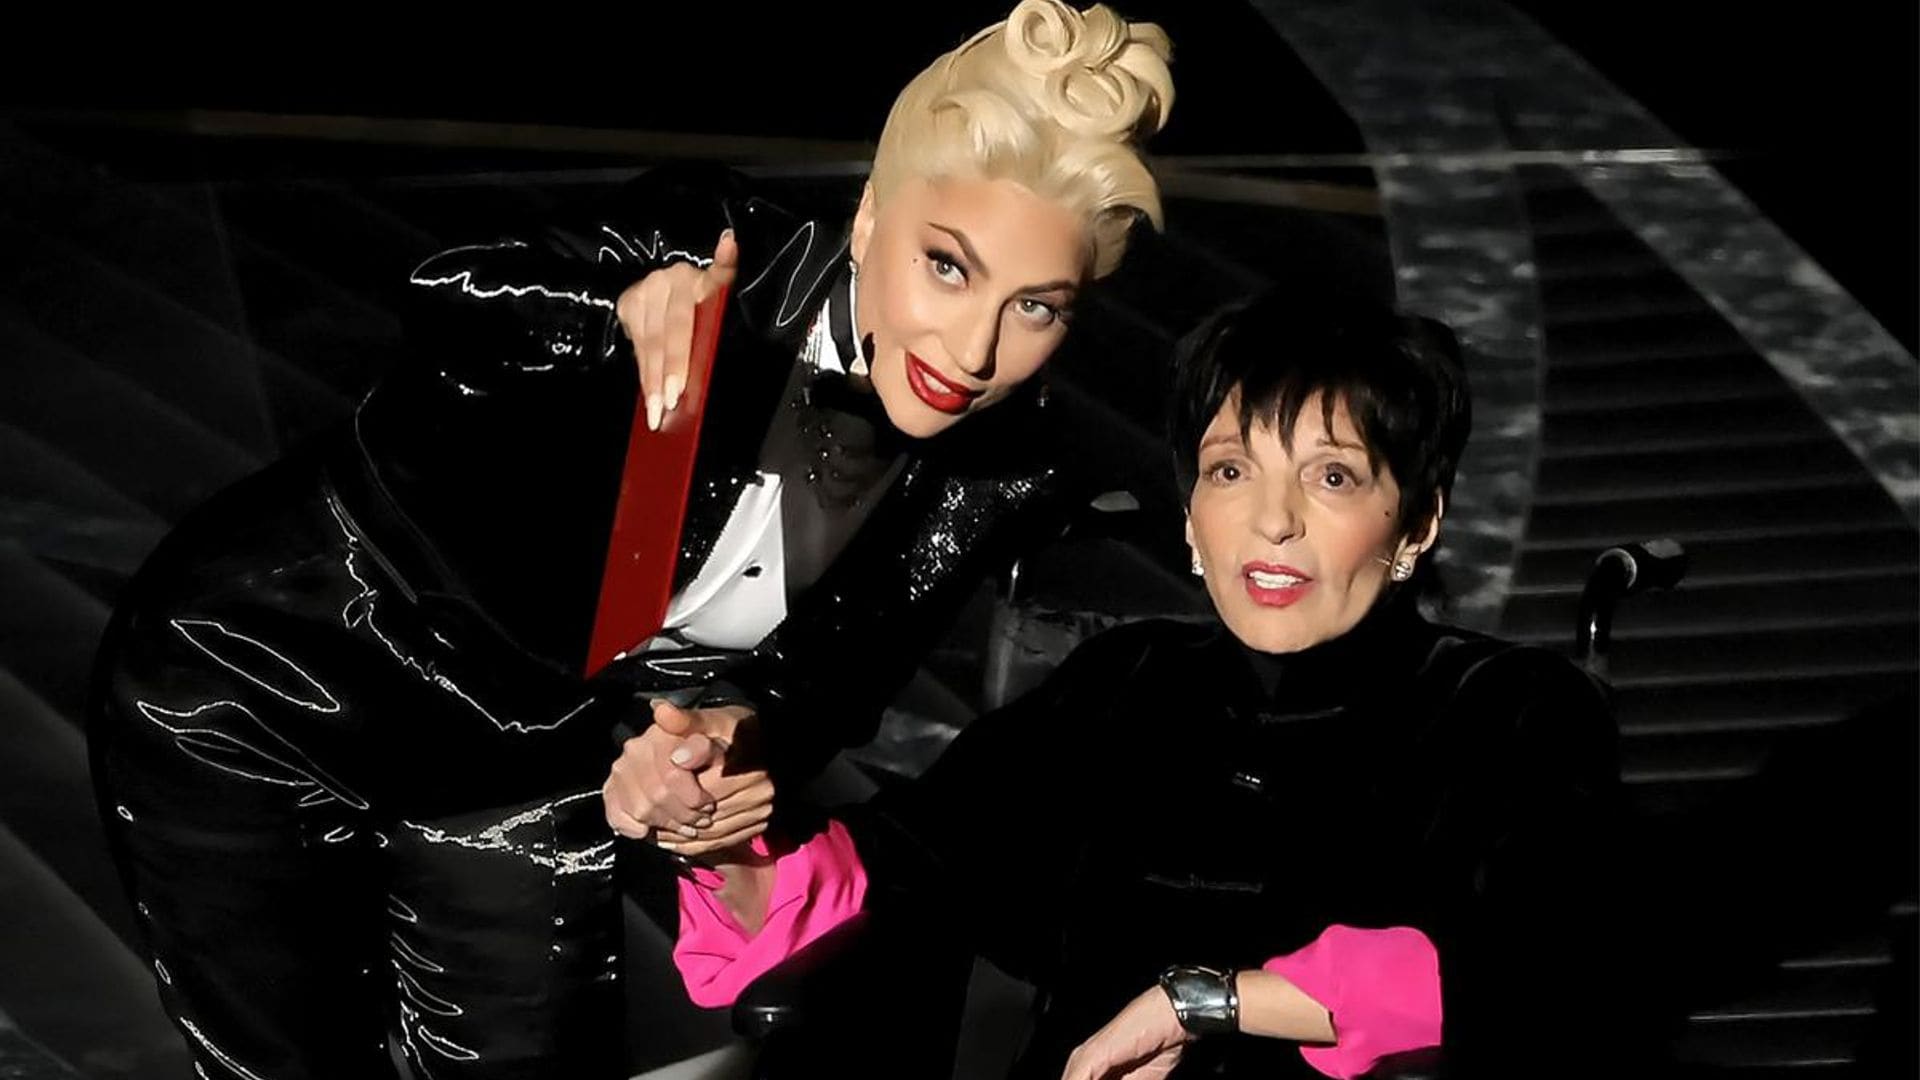 Lady Gaga’s touching moment with Liza Minelli at the Oscars: ‘I got you’